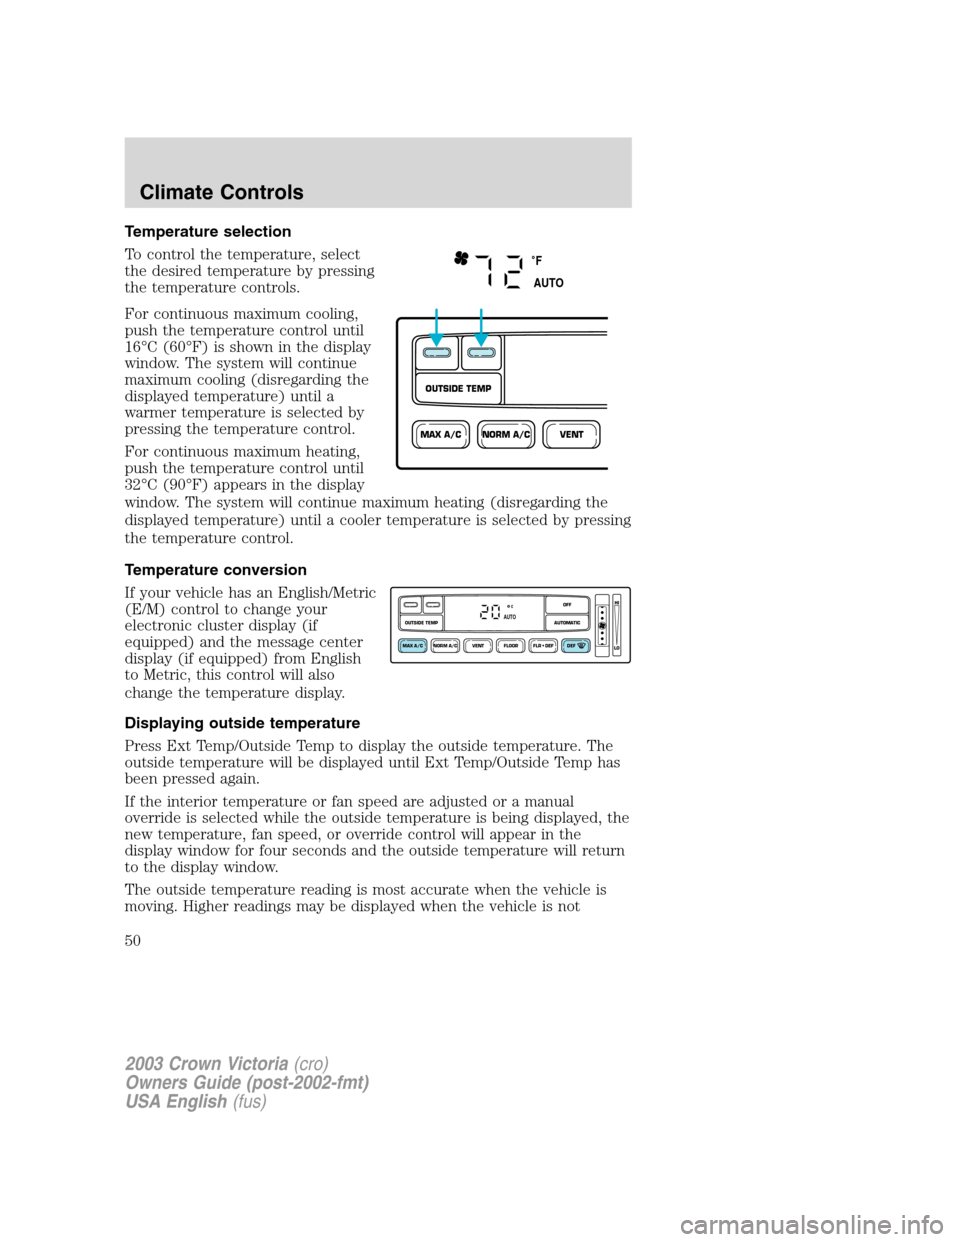 FORD CROWN VICTORIA 2003 2.G Service Manual Temperature selection
To control the temperature, select
the desired temperature by pressing
the temperature controls.
For continuous maximum cooling,
push the temperature control until
16°C (60°F) 